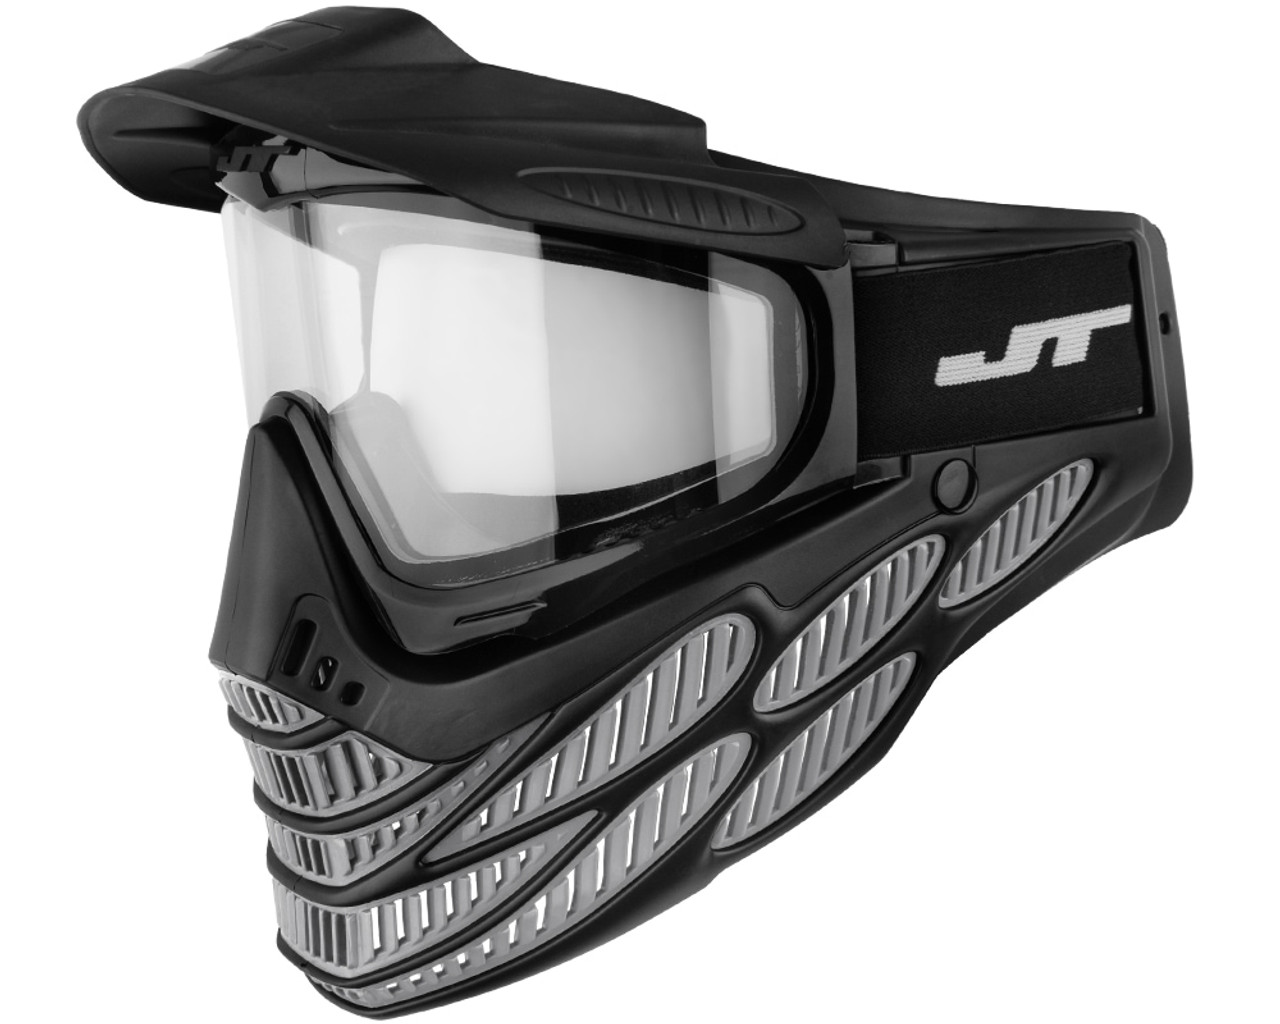 JT Paintball Mask, Black. All in great condition